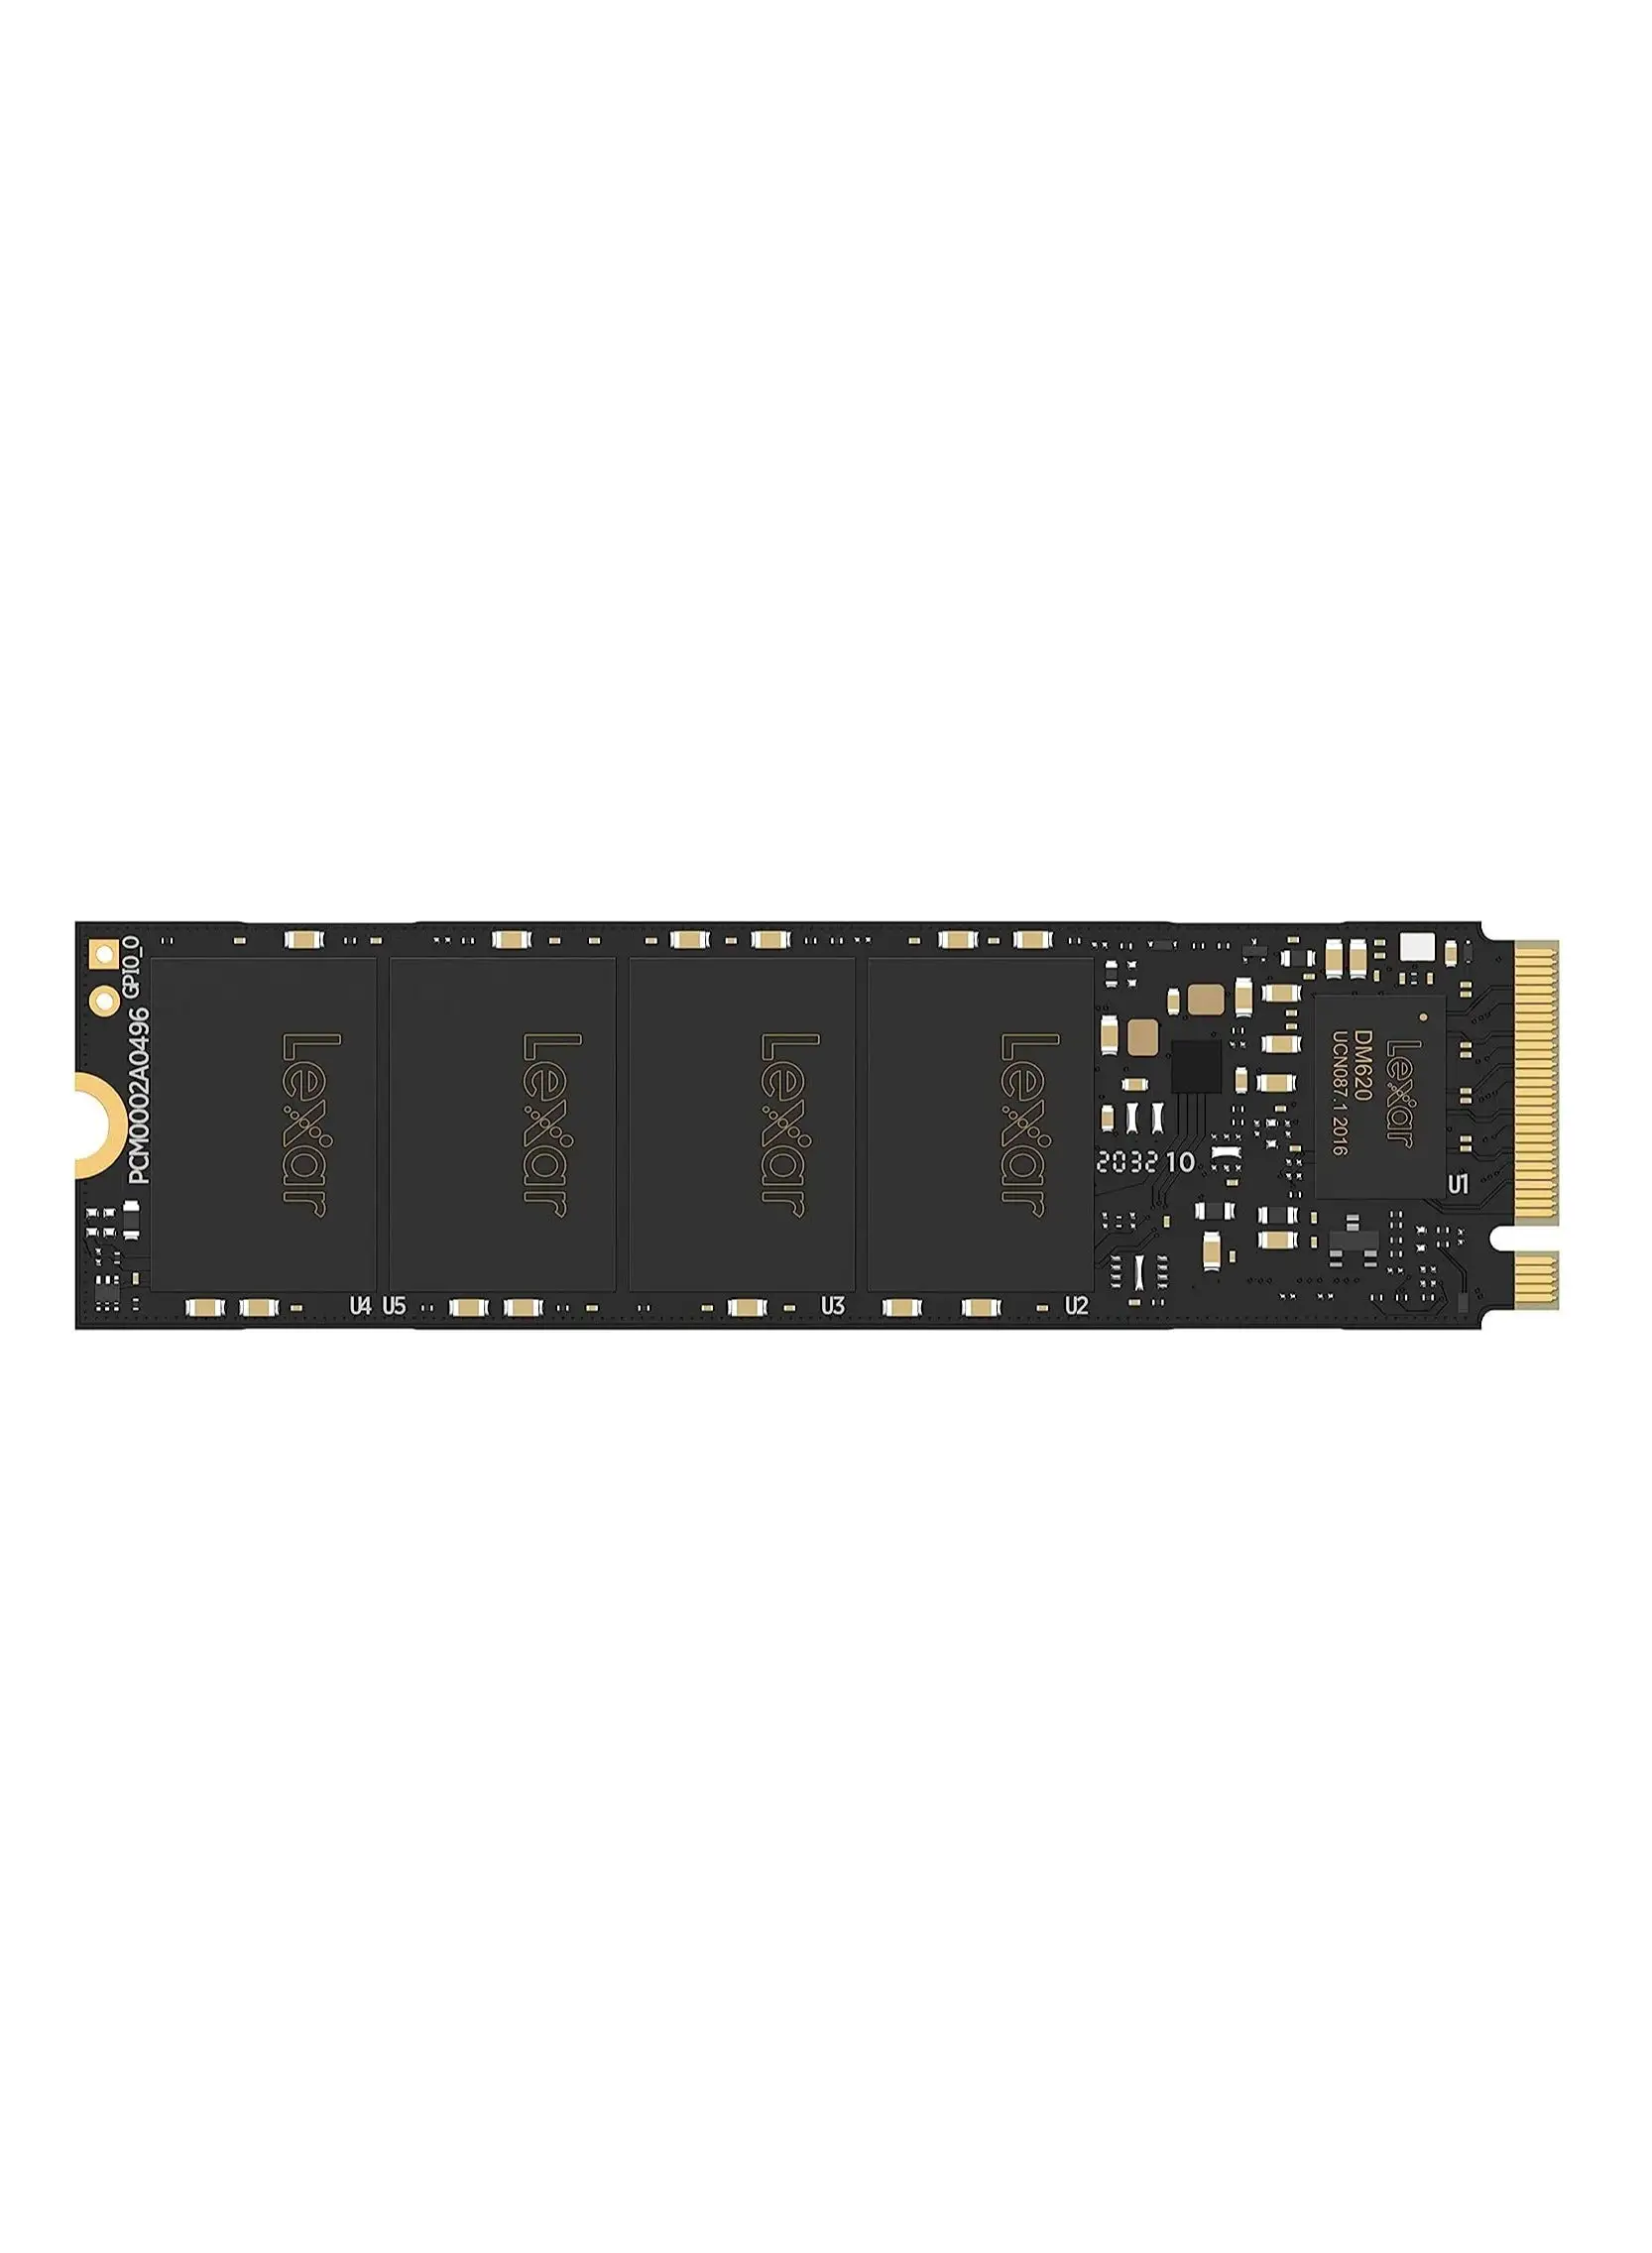 Lexar NM620 SSD PCIe Gen3 NVMe M.2 2280 Internal Solid State Drive, Up To 3500MB/s Read, For Gamers And PC Enthusiasts 256 GB